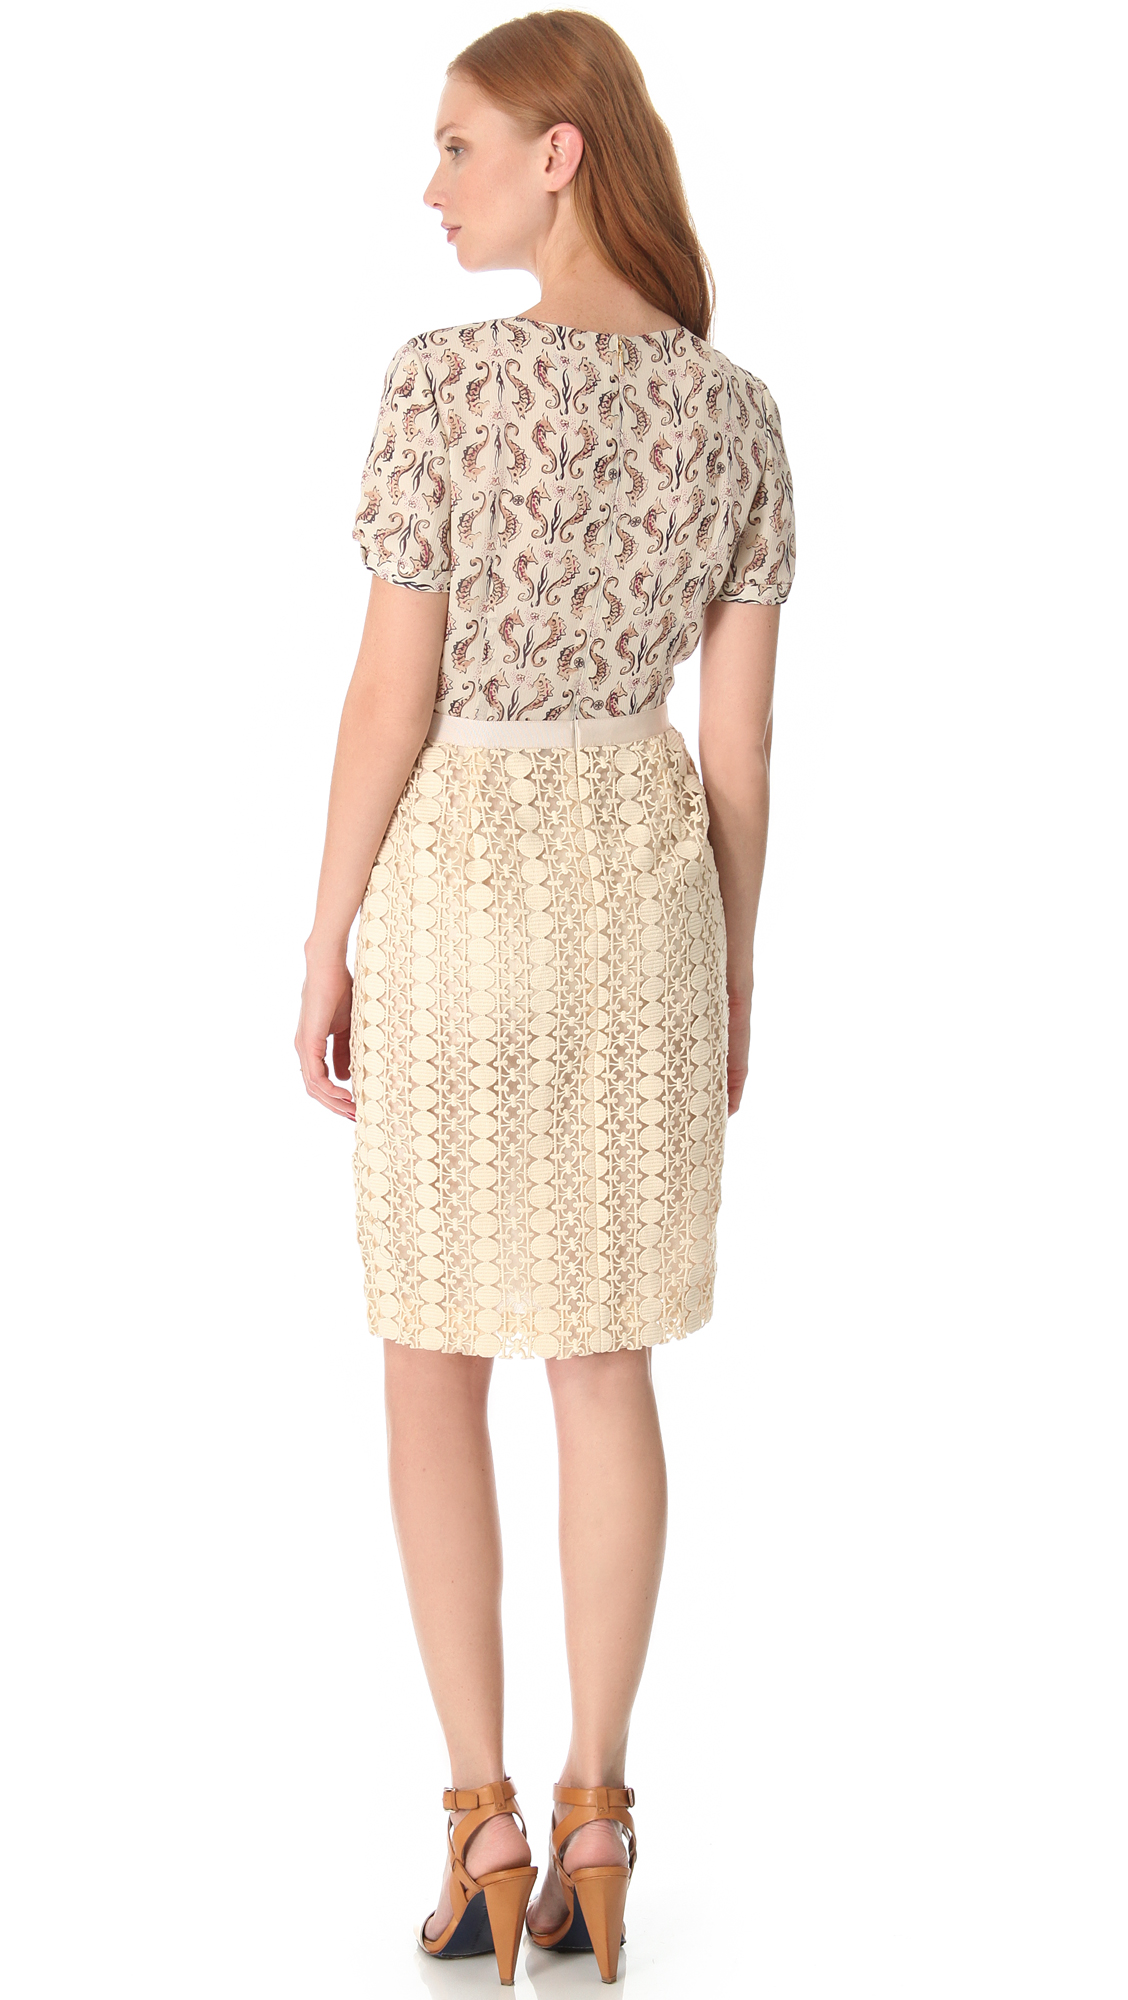 Tory Burch Adelaide Seahorse Dress in Natural | Lyst